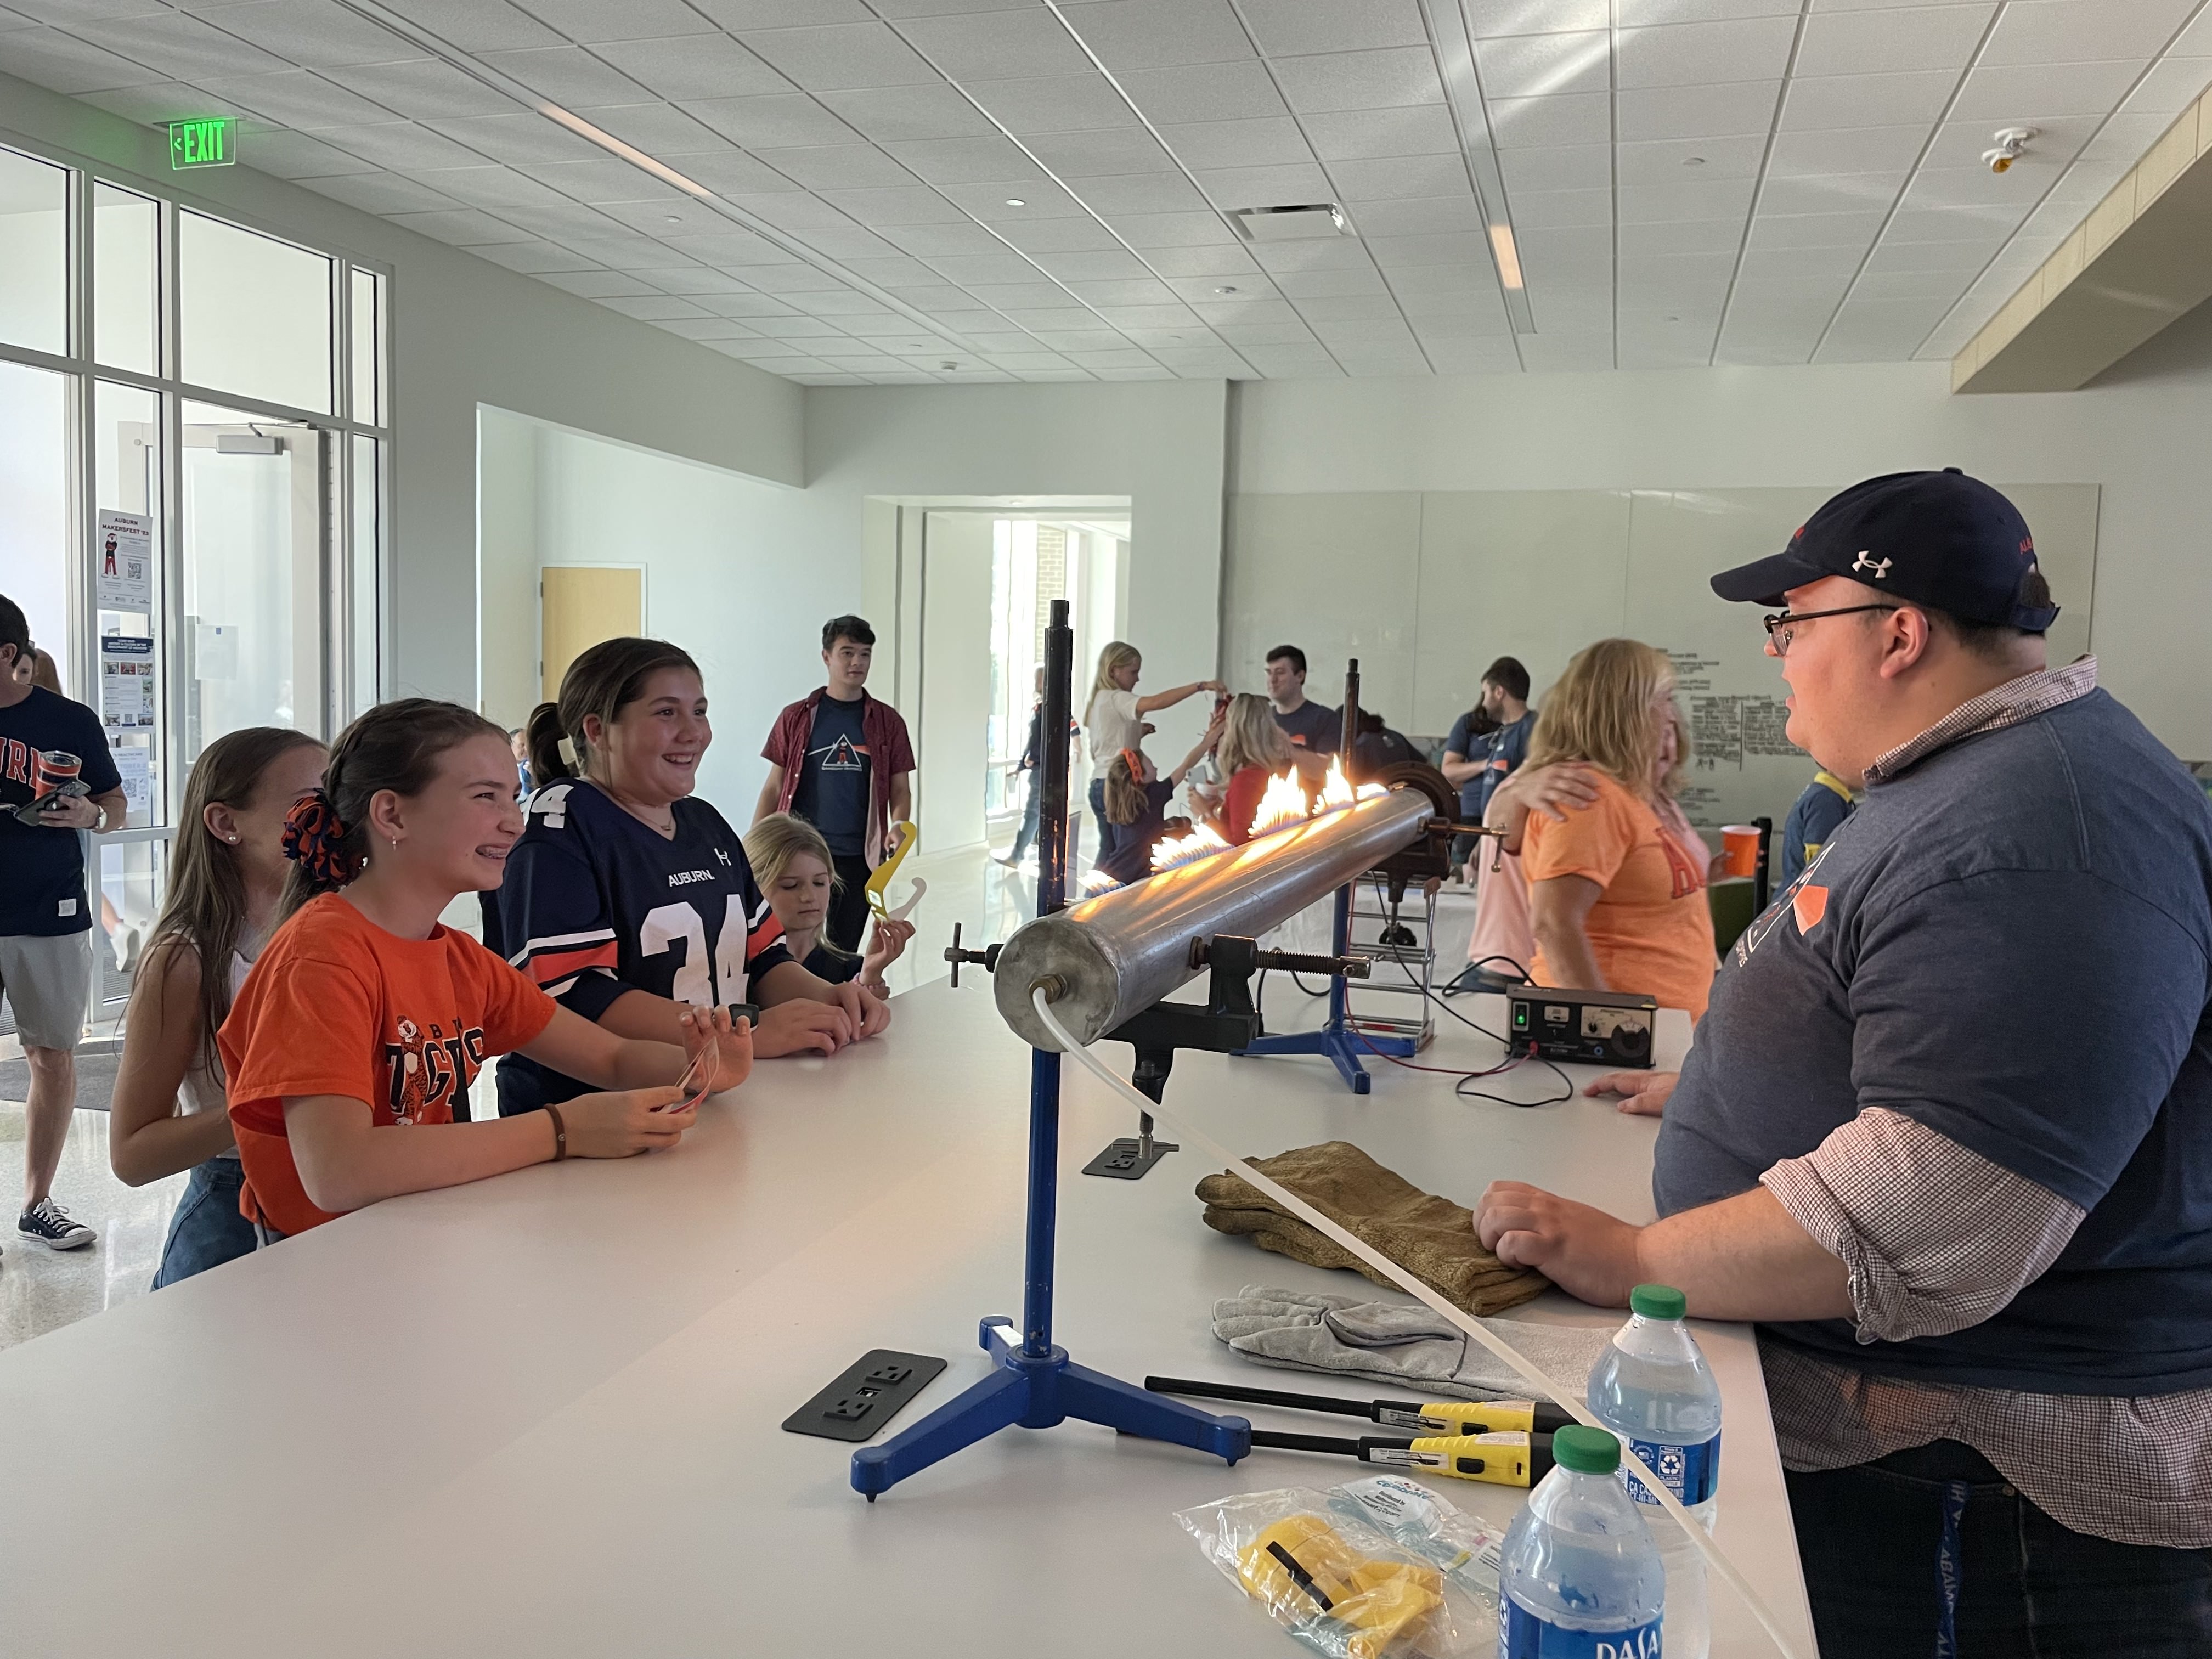 Tailgaters enjoyed witnessing the dancing flame of the Ruben’s Tube. The flame forms a specific pattern based on the sound feeding into the tube.